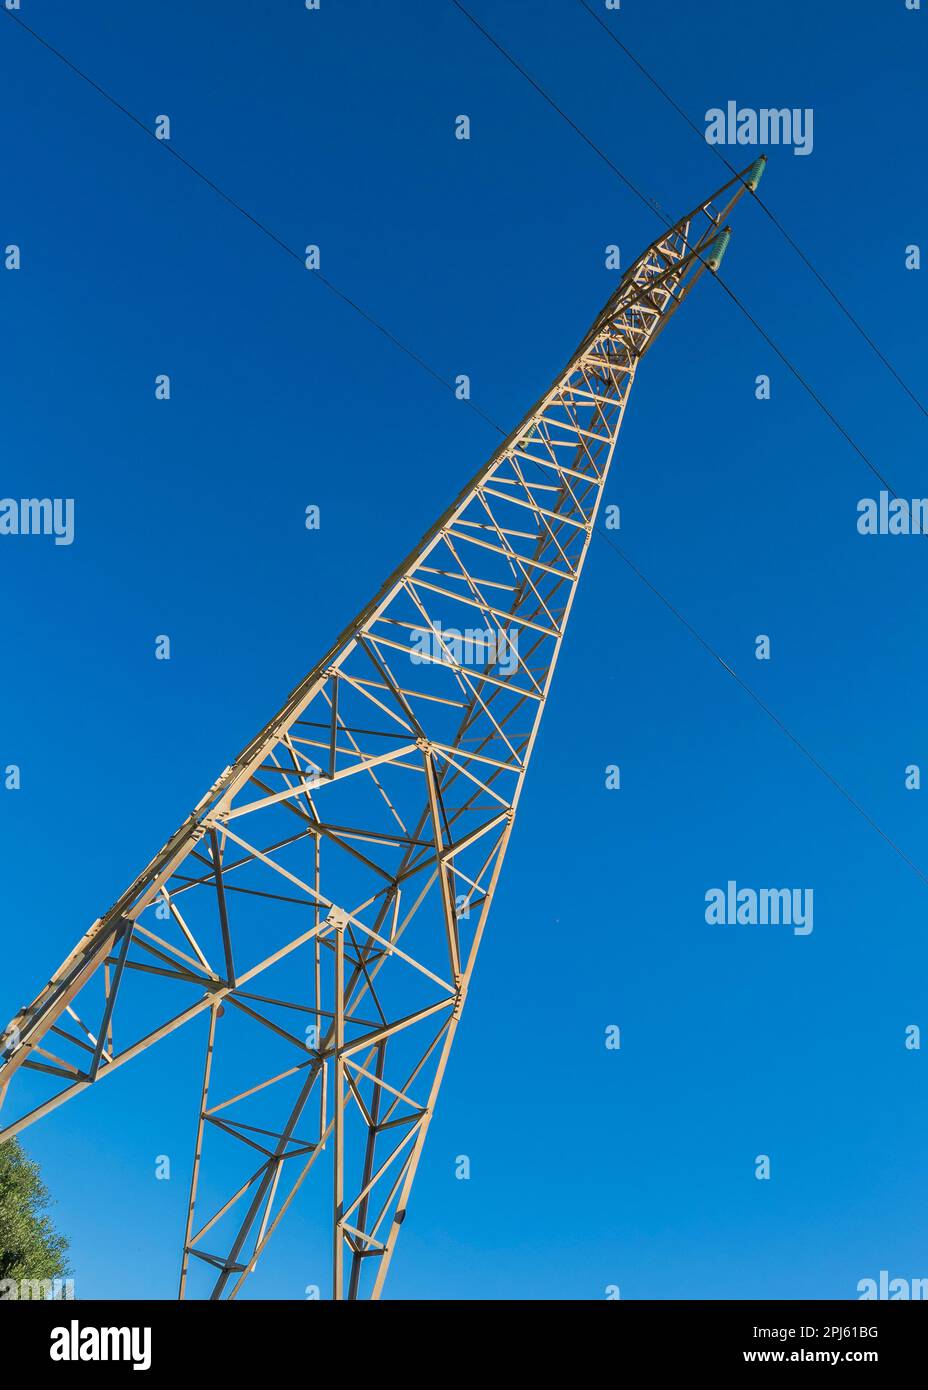 Electric power transmission tower Stock Photo